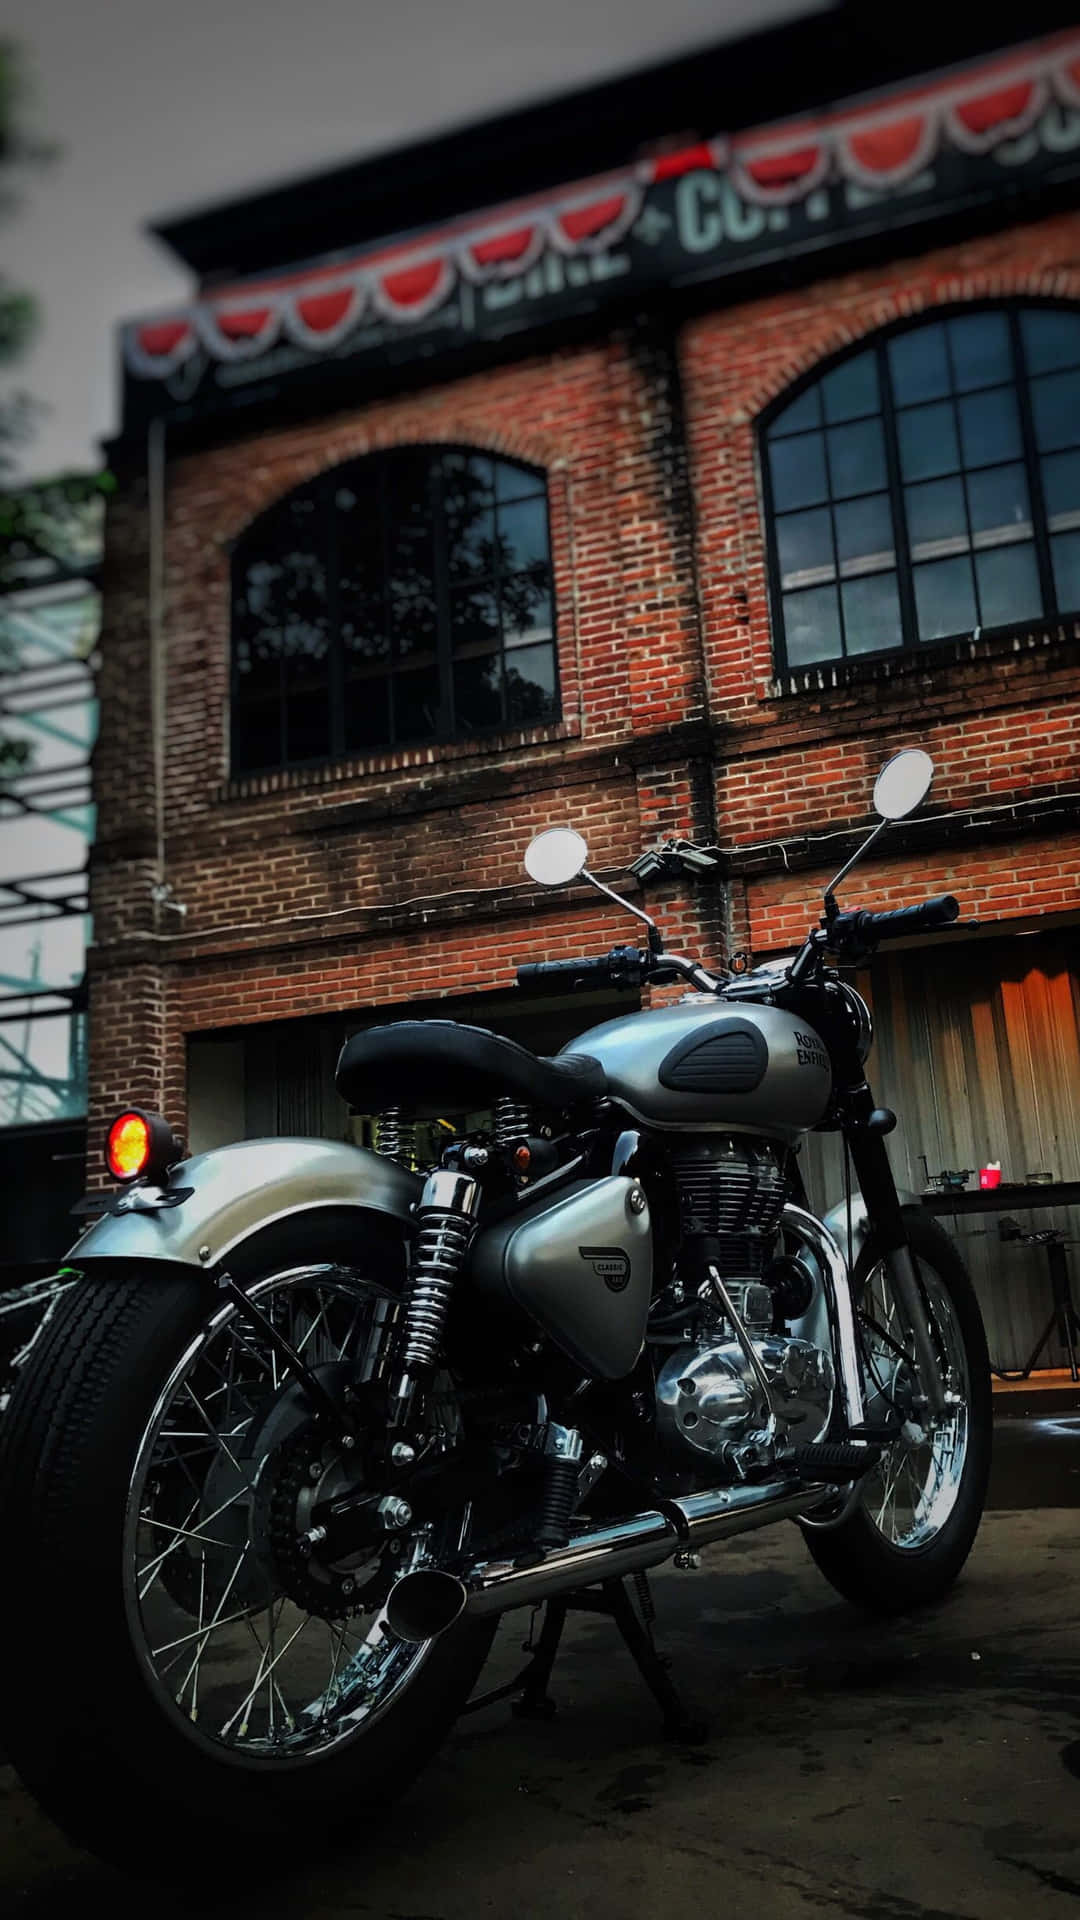 A Motorcycle Parked In Front Of A Brick Building